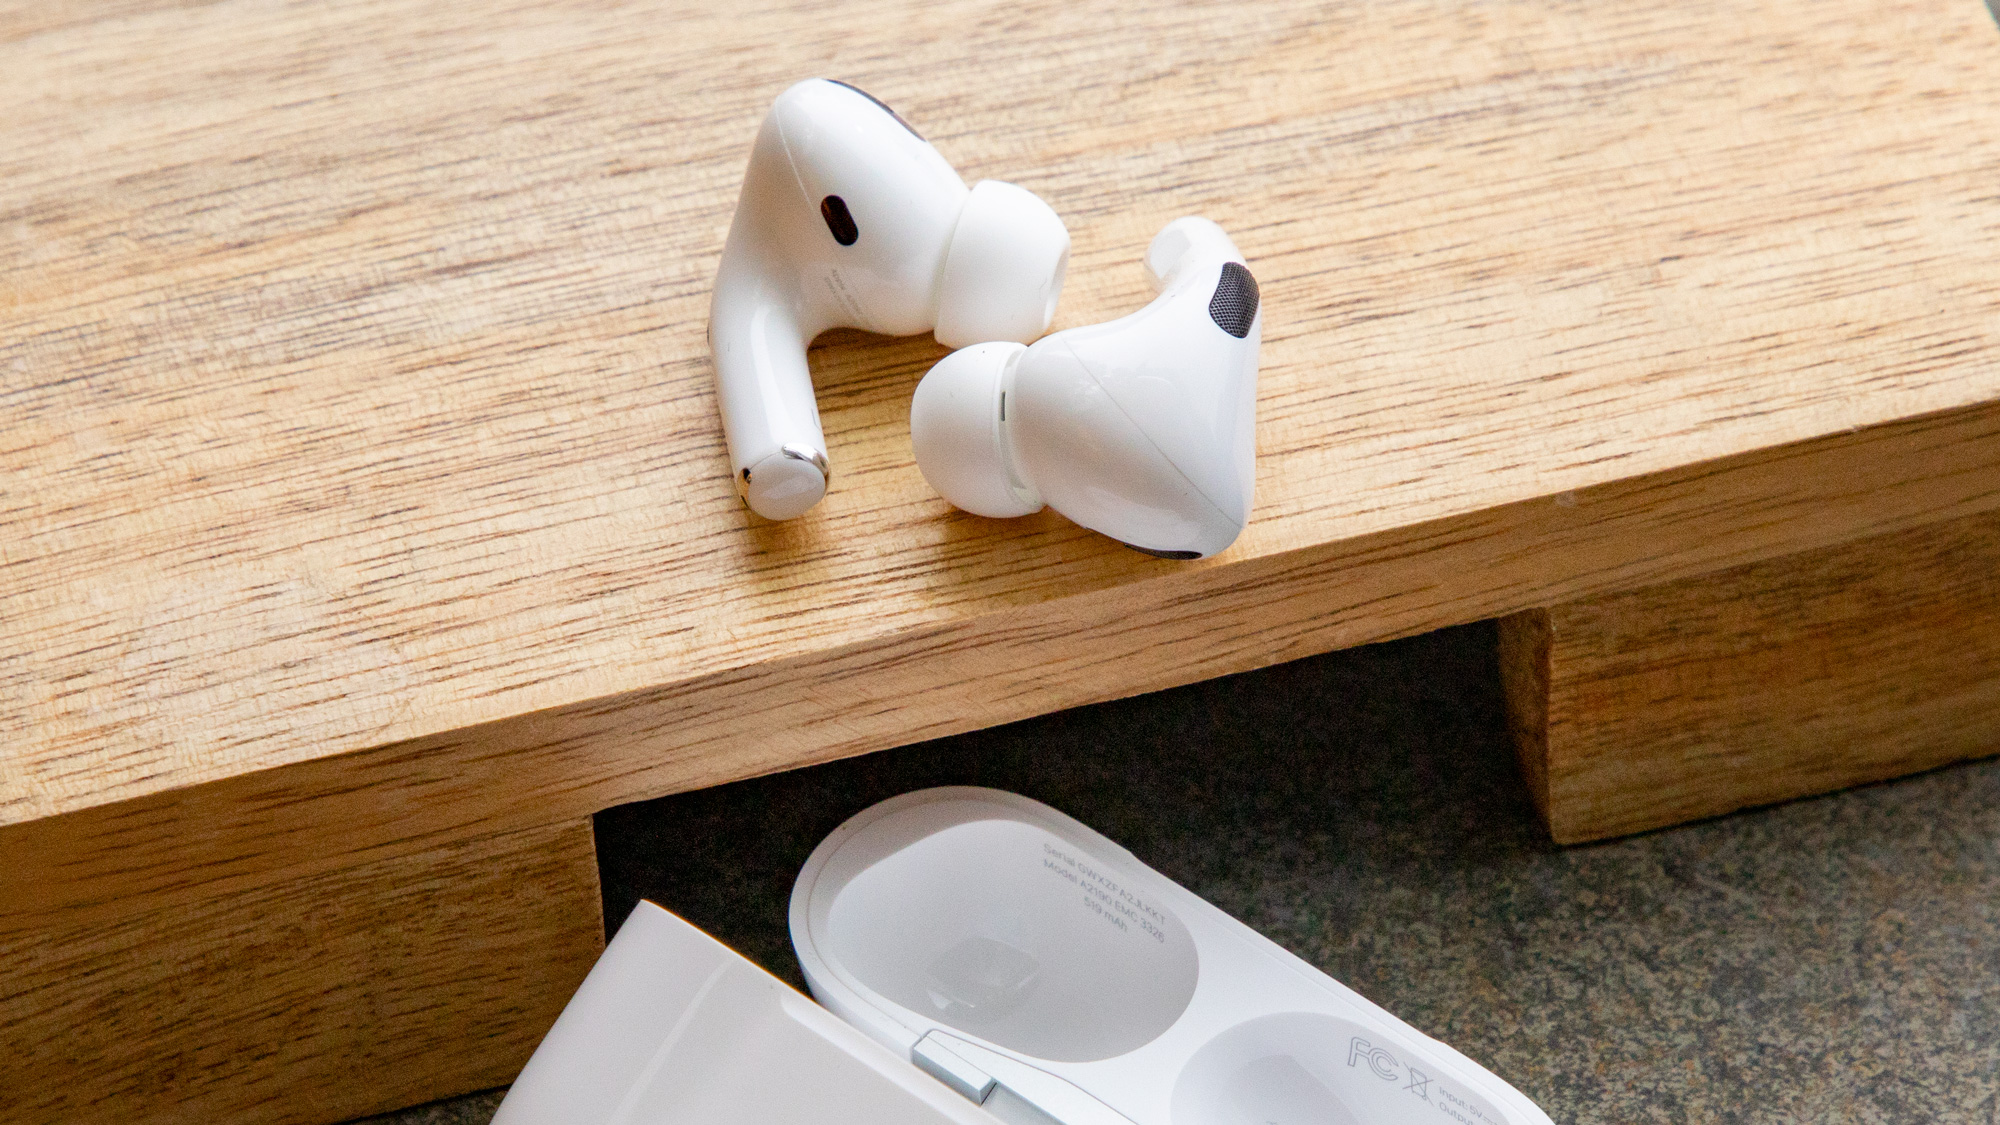 Apple's AirPods changed everything. They gave the company near